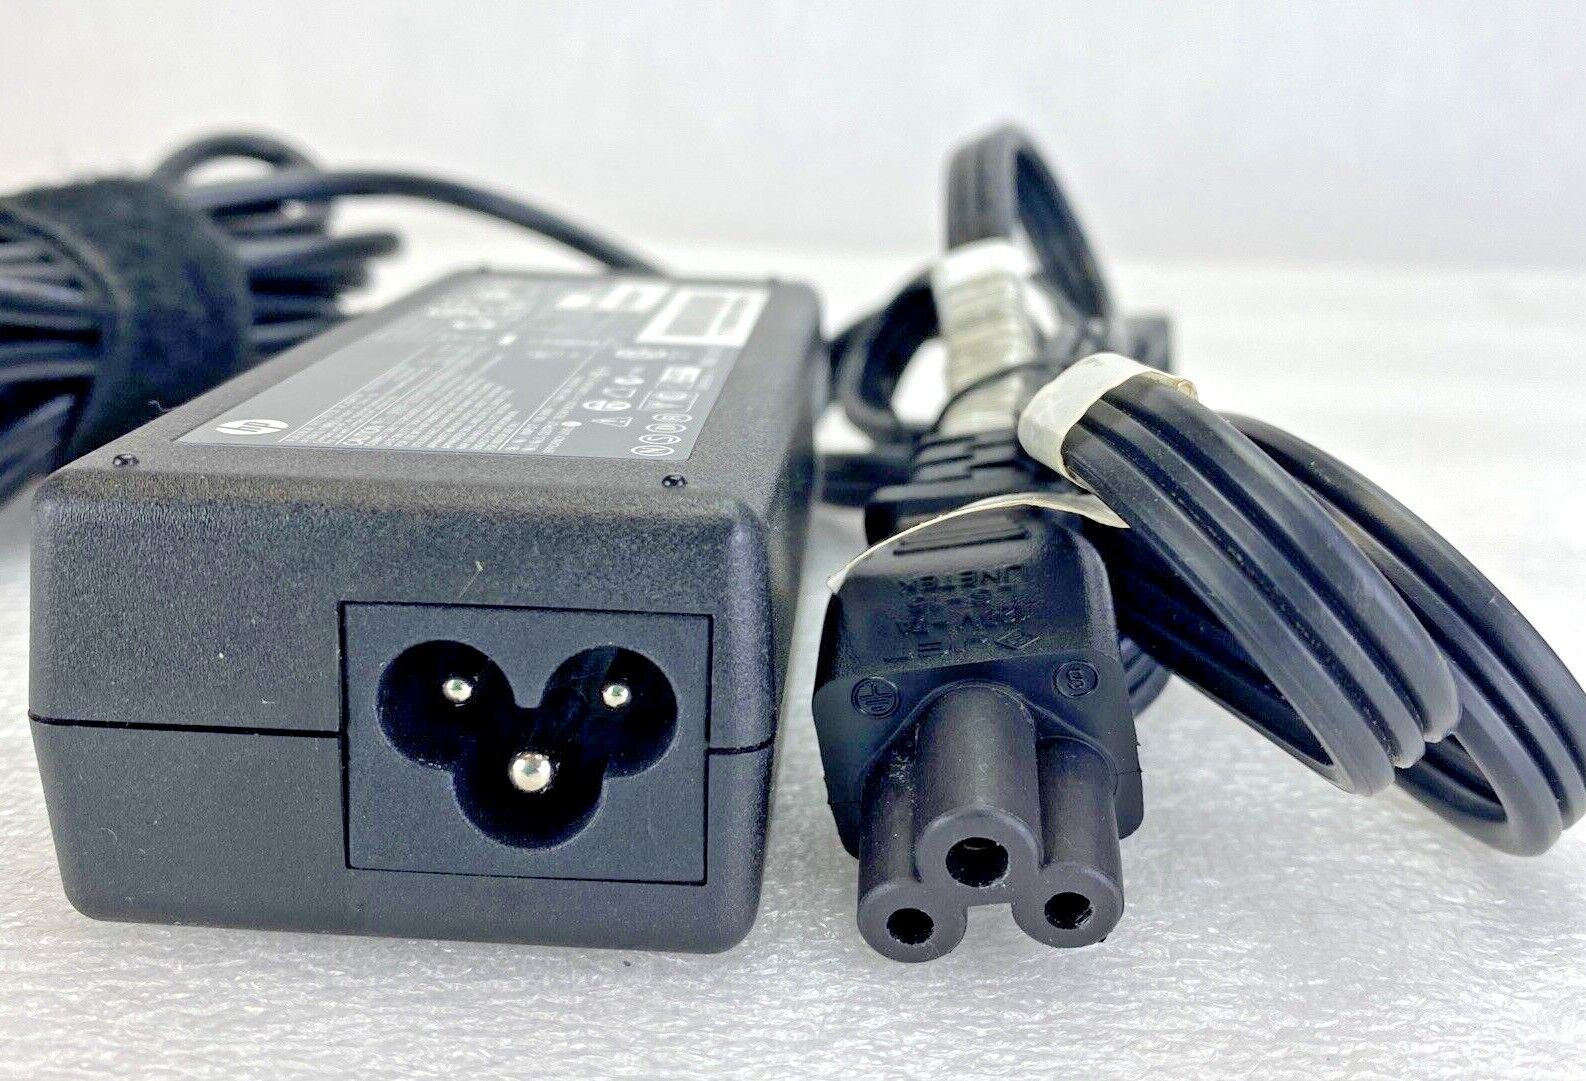 genuine HP 608425-001 laptop charger AC power adapter 609939-001 18.5V 3.5A 65W